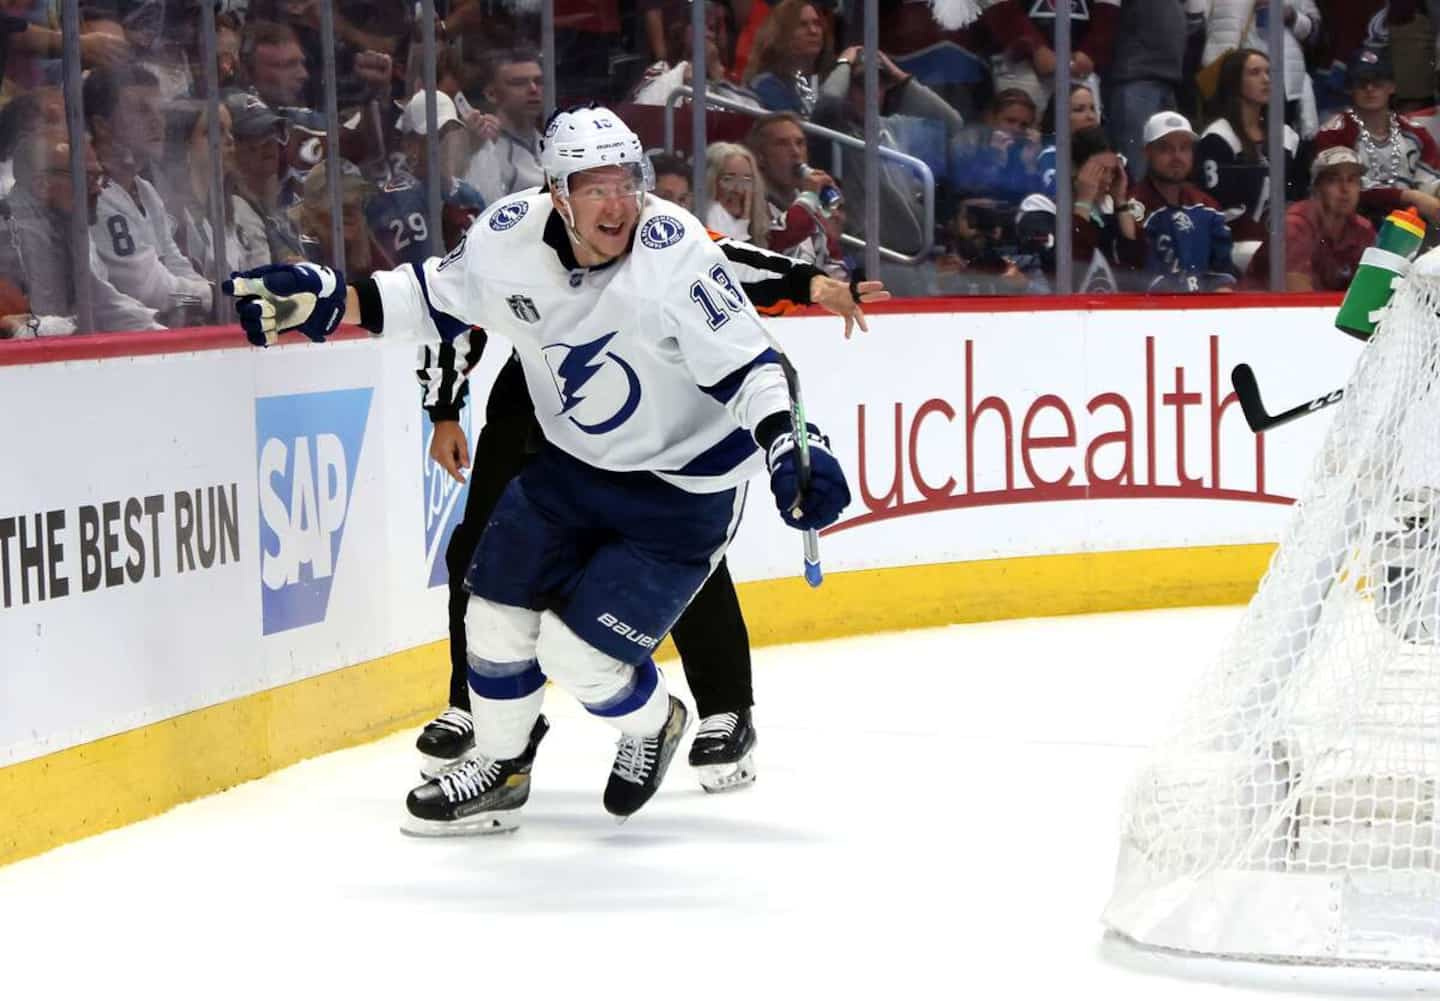 Free agents in the NHL: Ondrej Palat would join the Devils